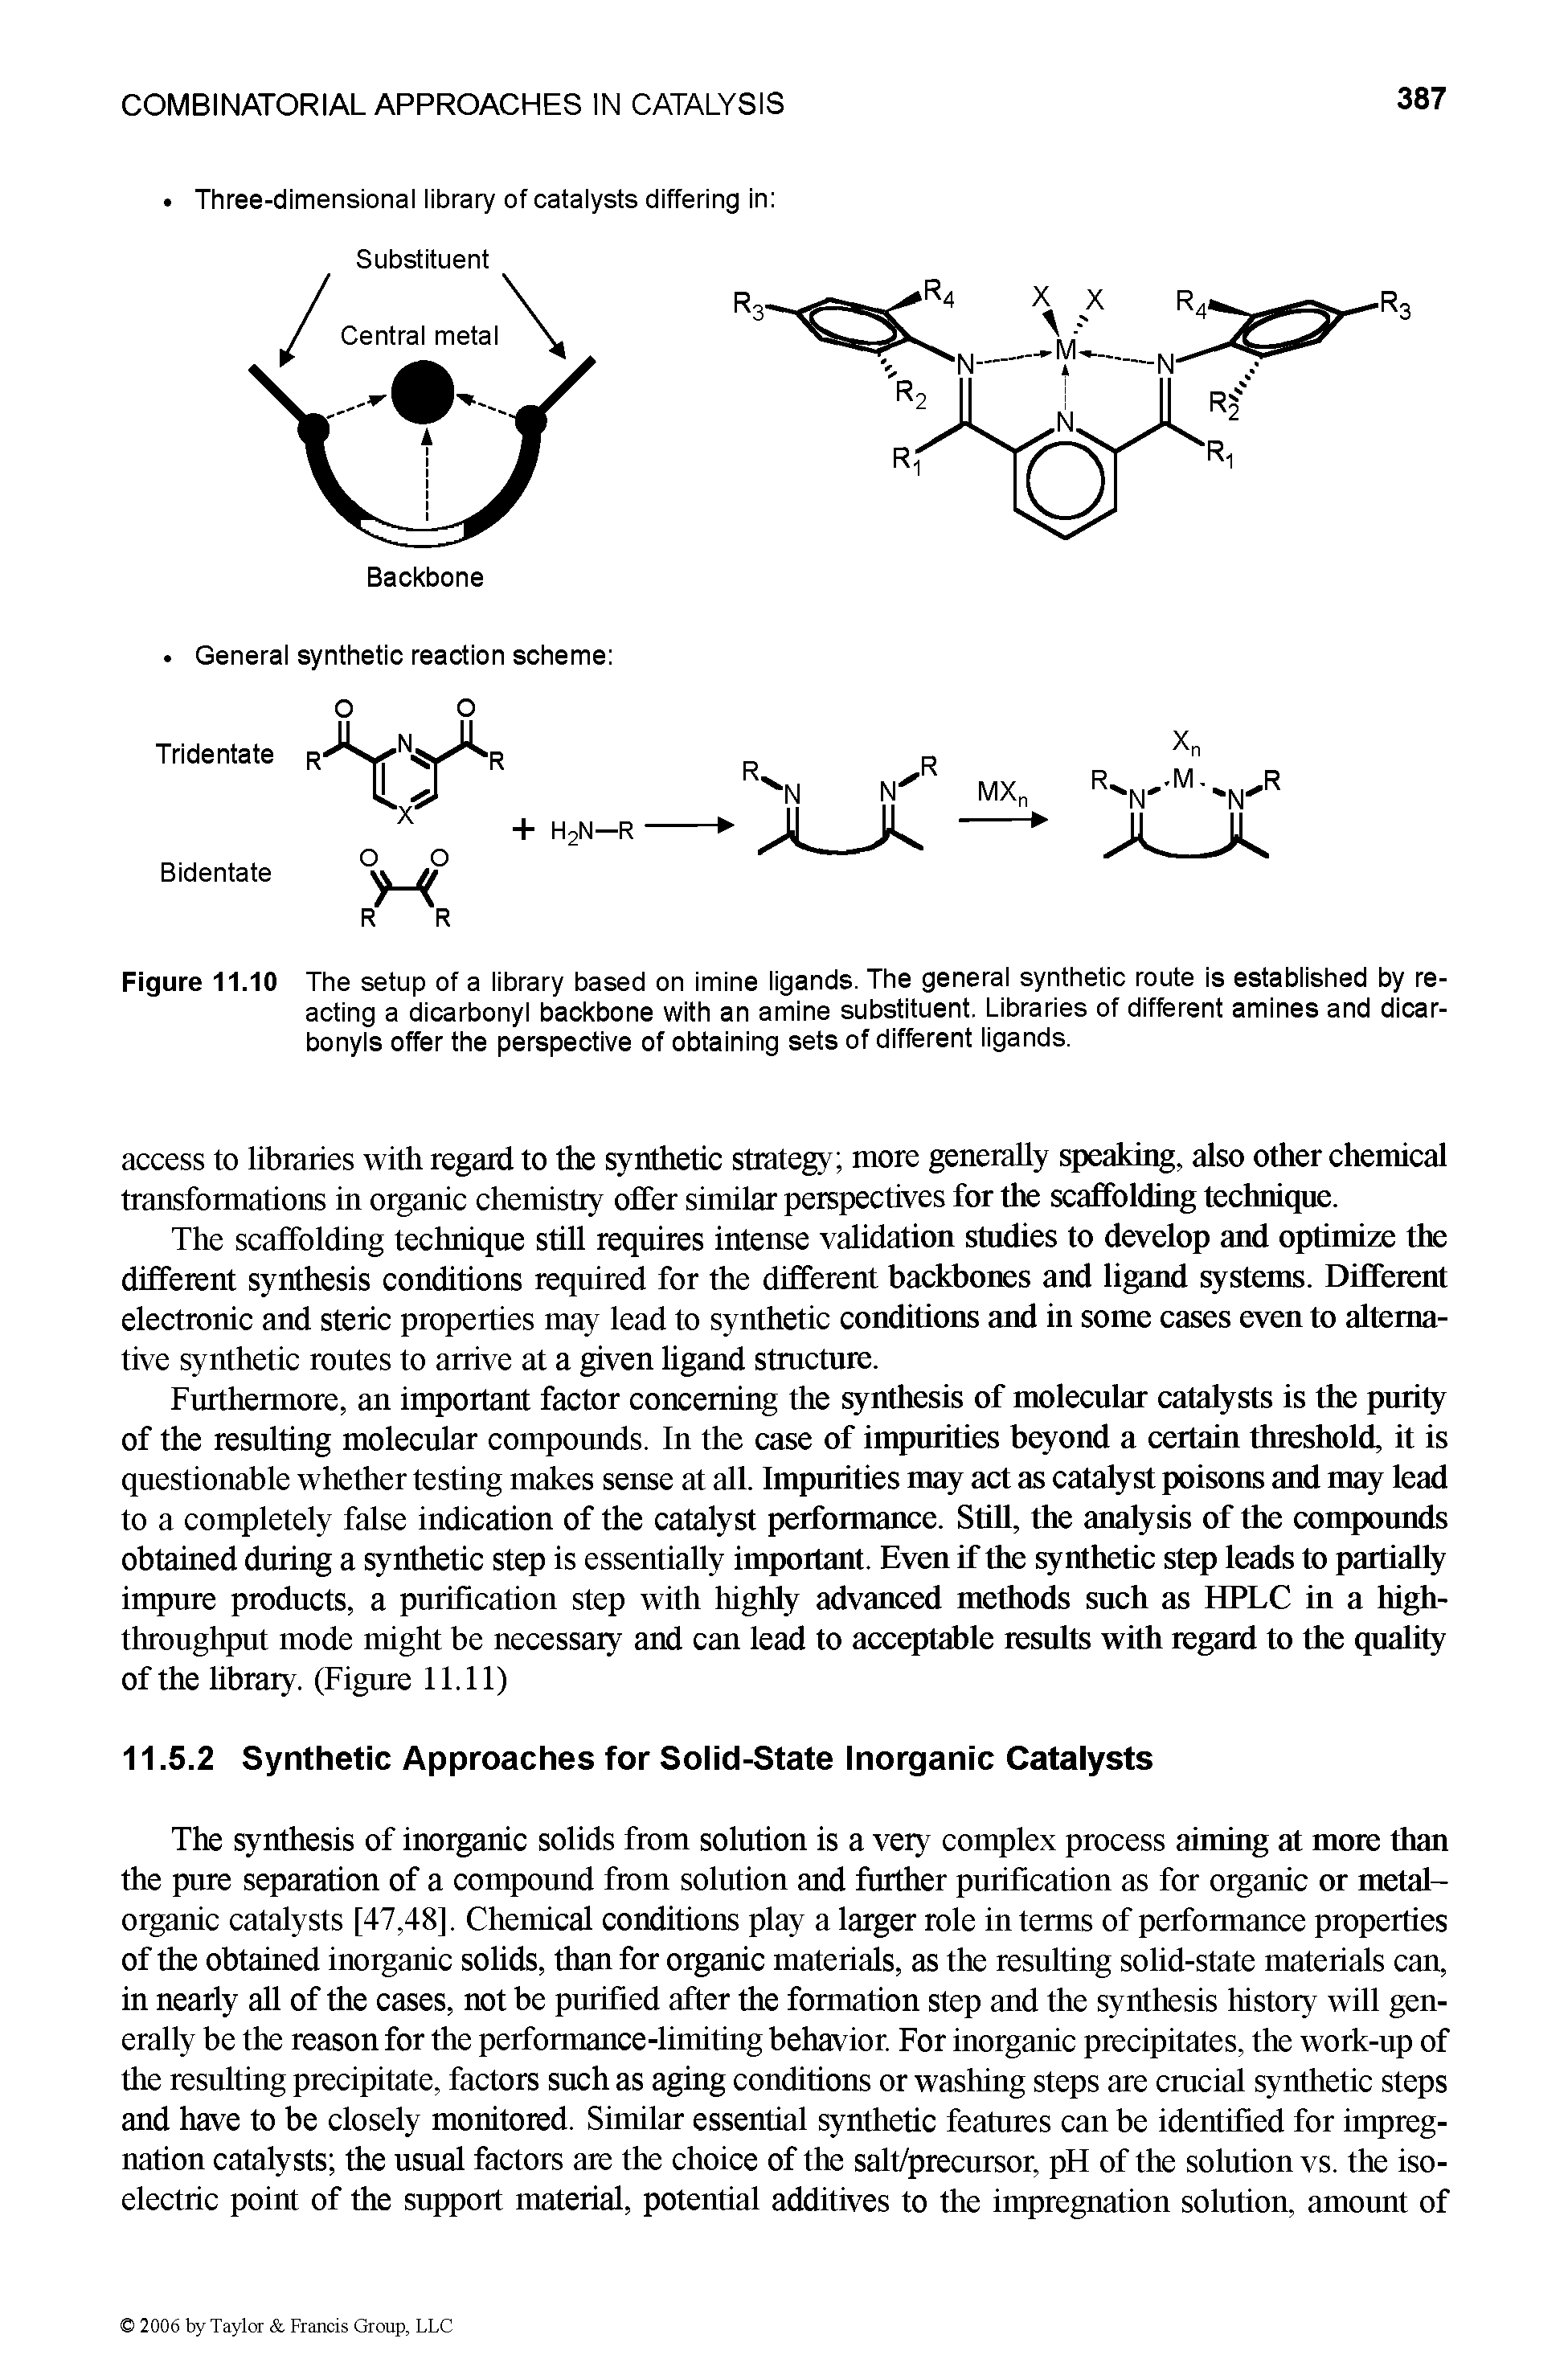 Figure 11.10 The setup of a library based on imine ligands. The general synthetic route is established by reacting a dicarbonyl backbone with an amine substituent. Libraries of different amines and dicarbonyls offer the perspective of obtaining sets of different ligands.